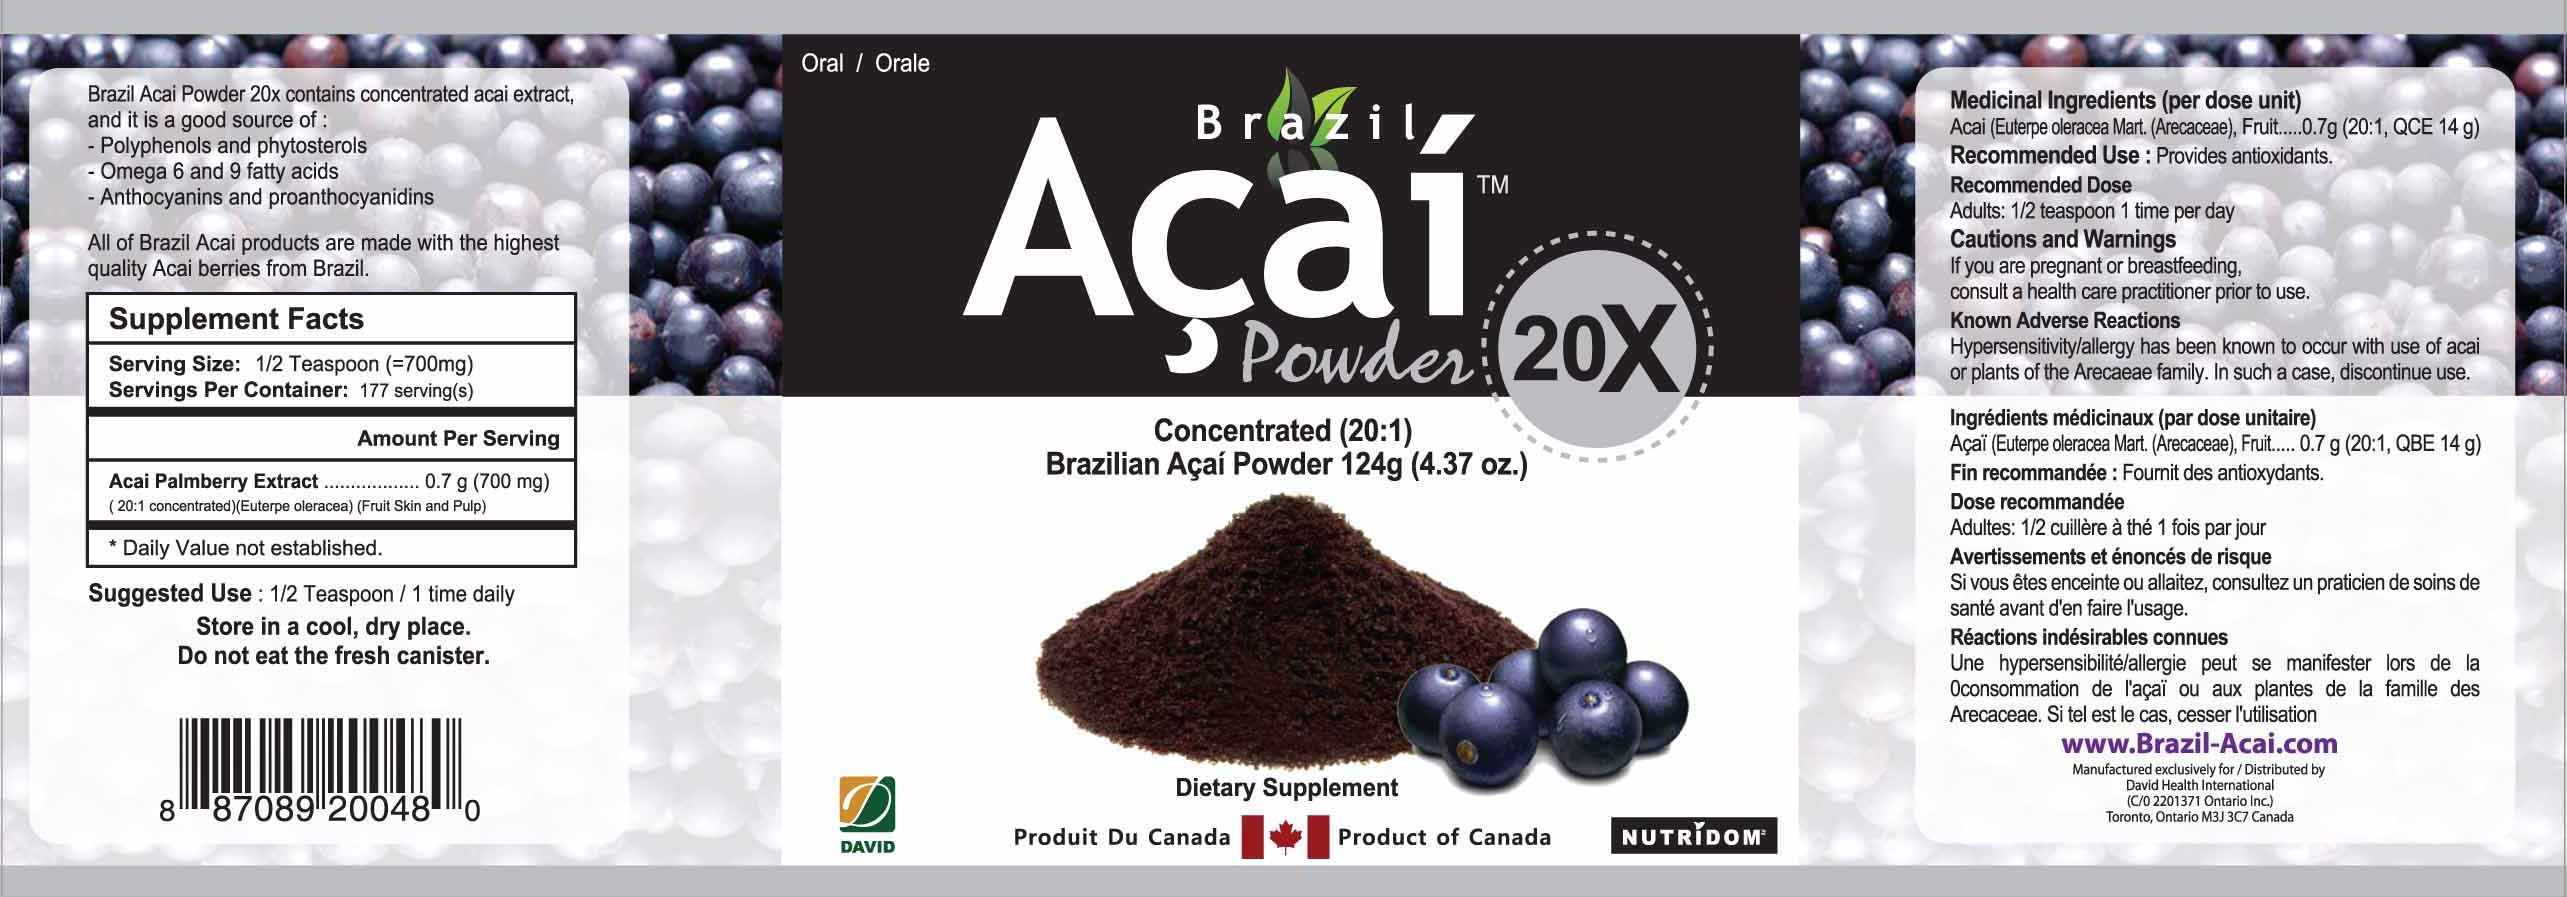 BRAZIL ACAI 20X CONCENTRATED POWDER (124G)